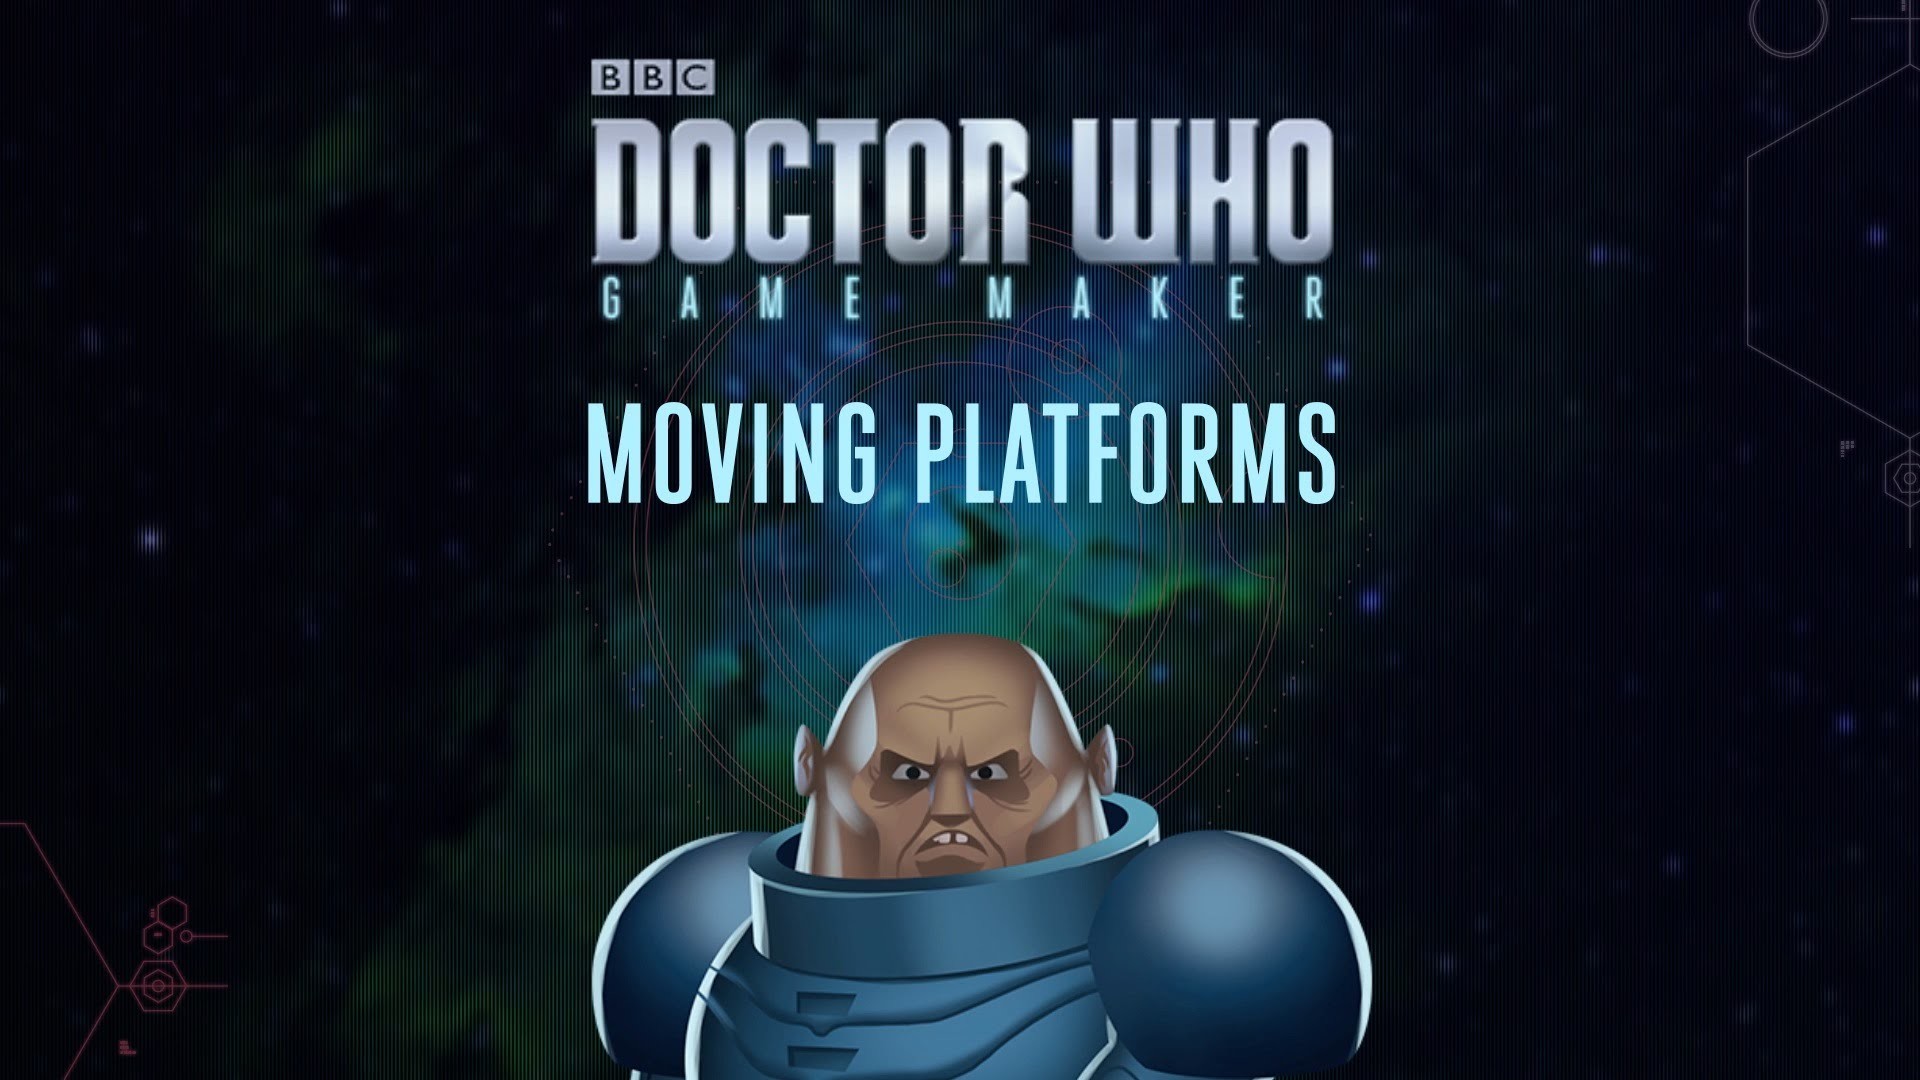 1920x1080 How to make moving platforms - Doctor Who: Game Maker - BBC